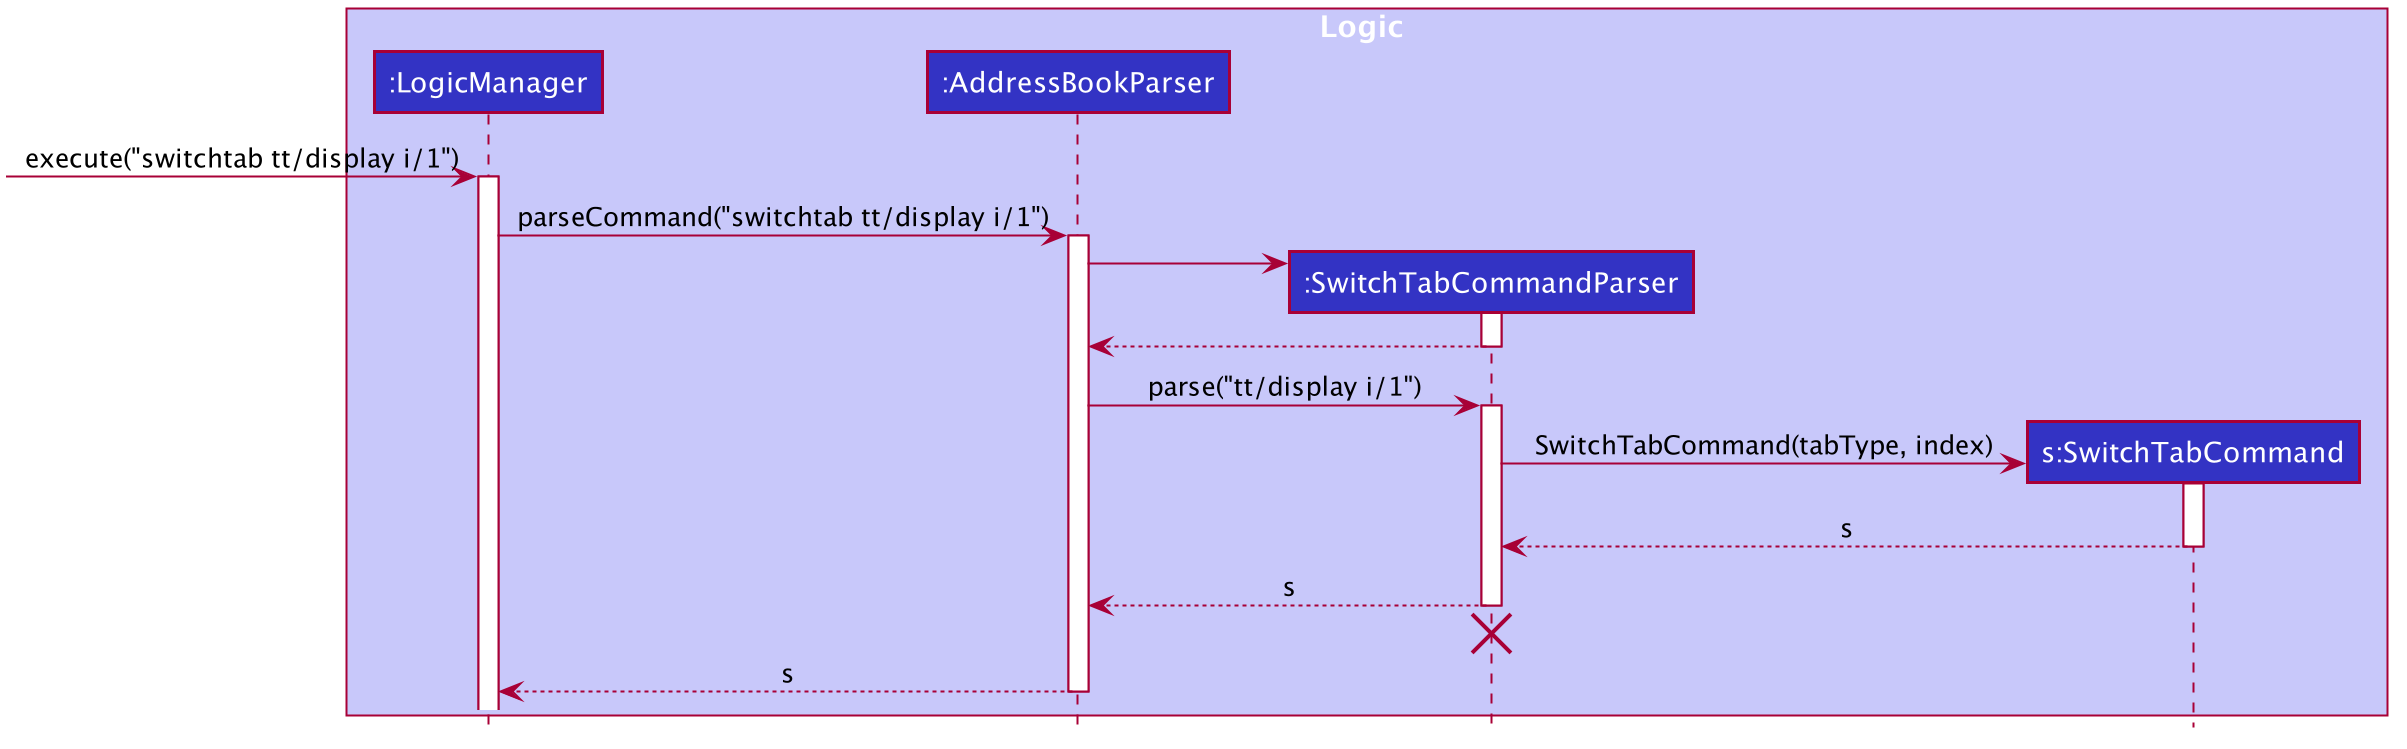 SwitchTabsSequenceDiagram0